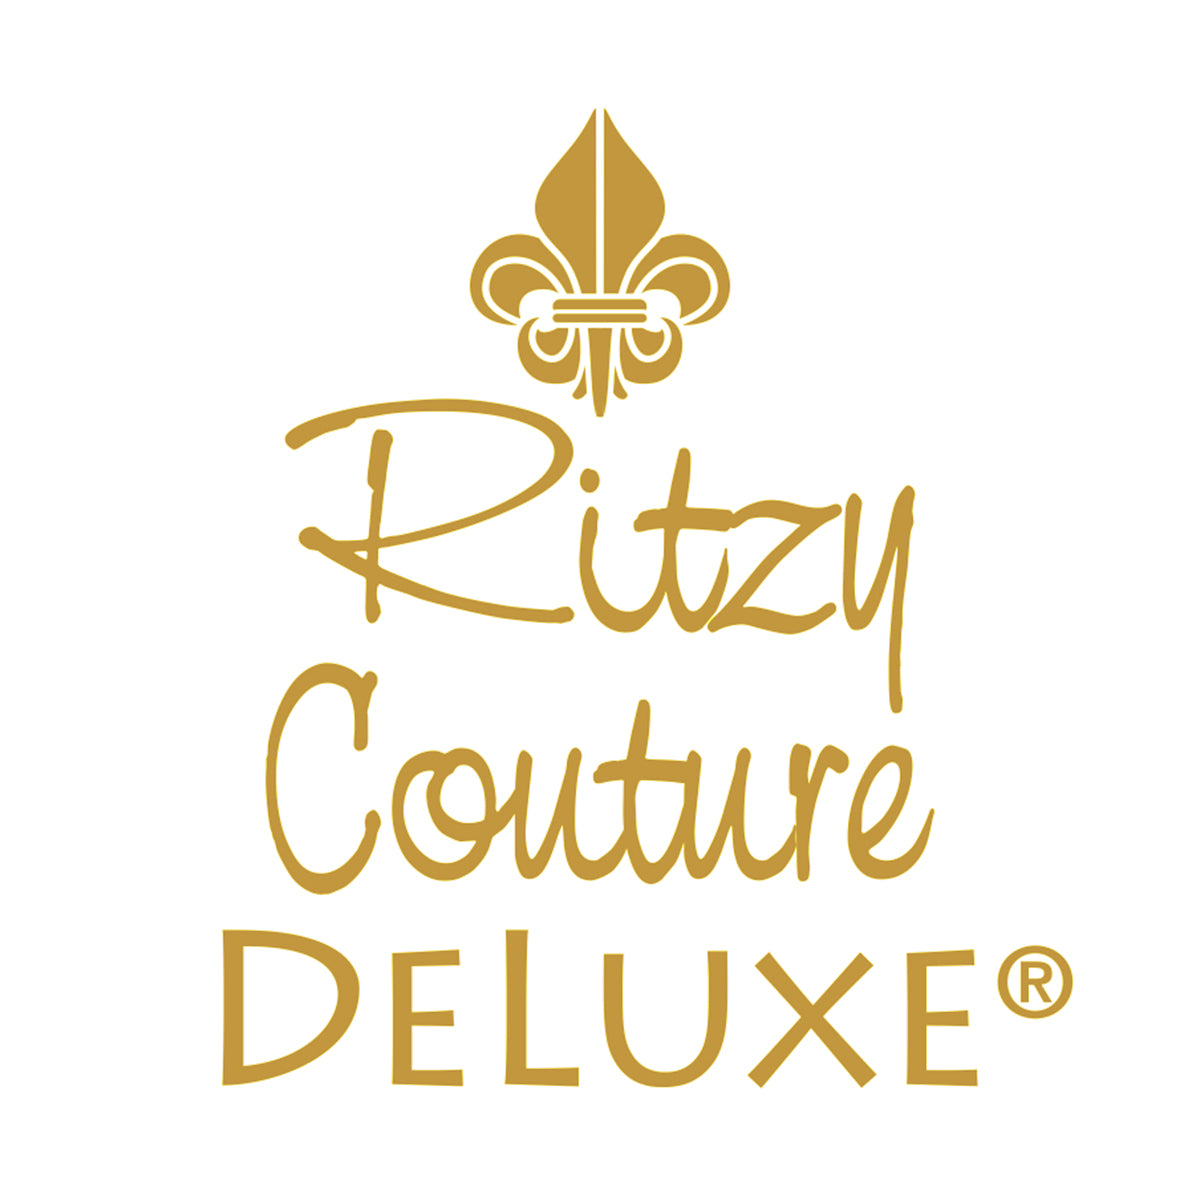 Shamrock St Patricks 18" Charm Necklace by Ritzy Couture DeLuxe-18k Gold Plating